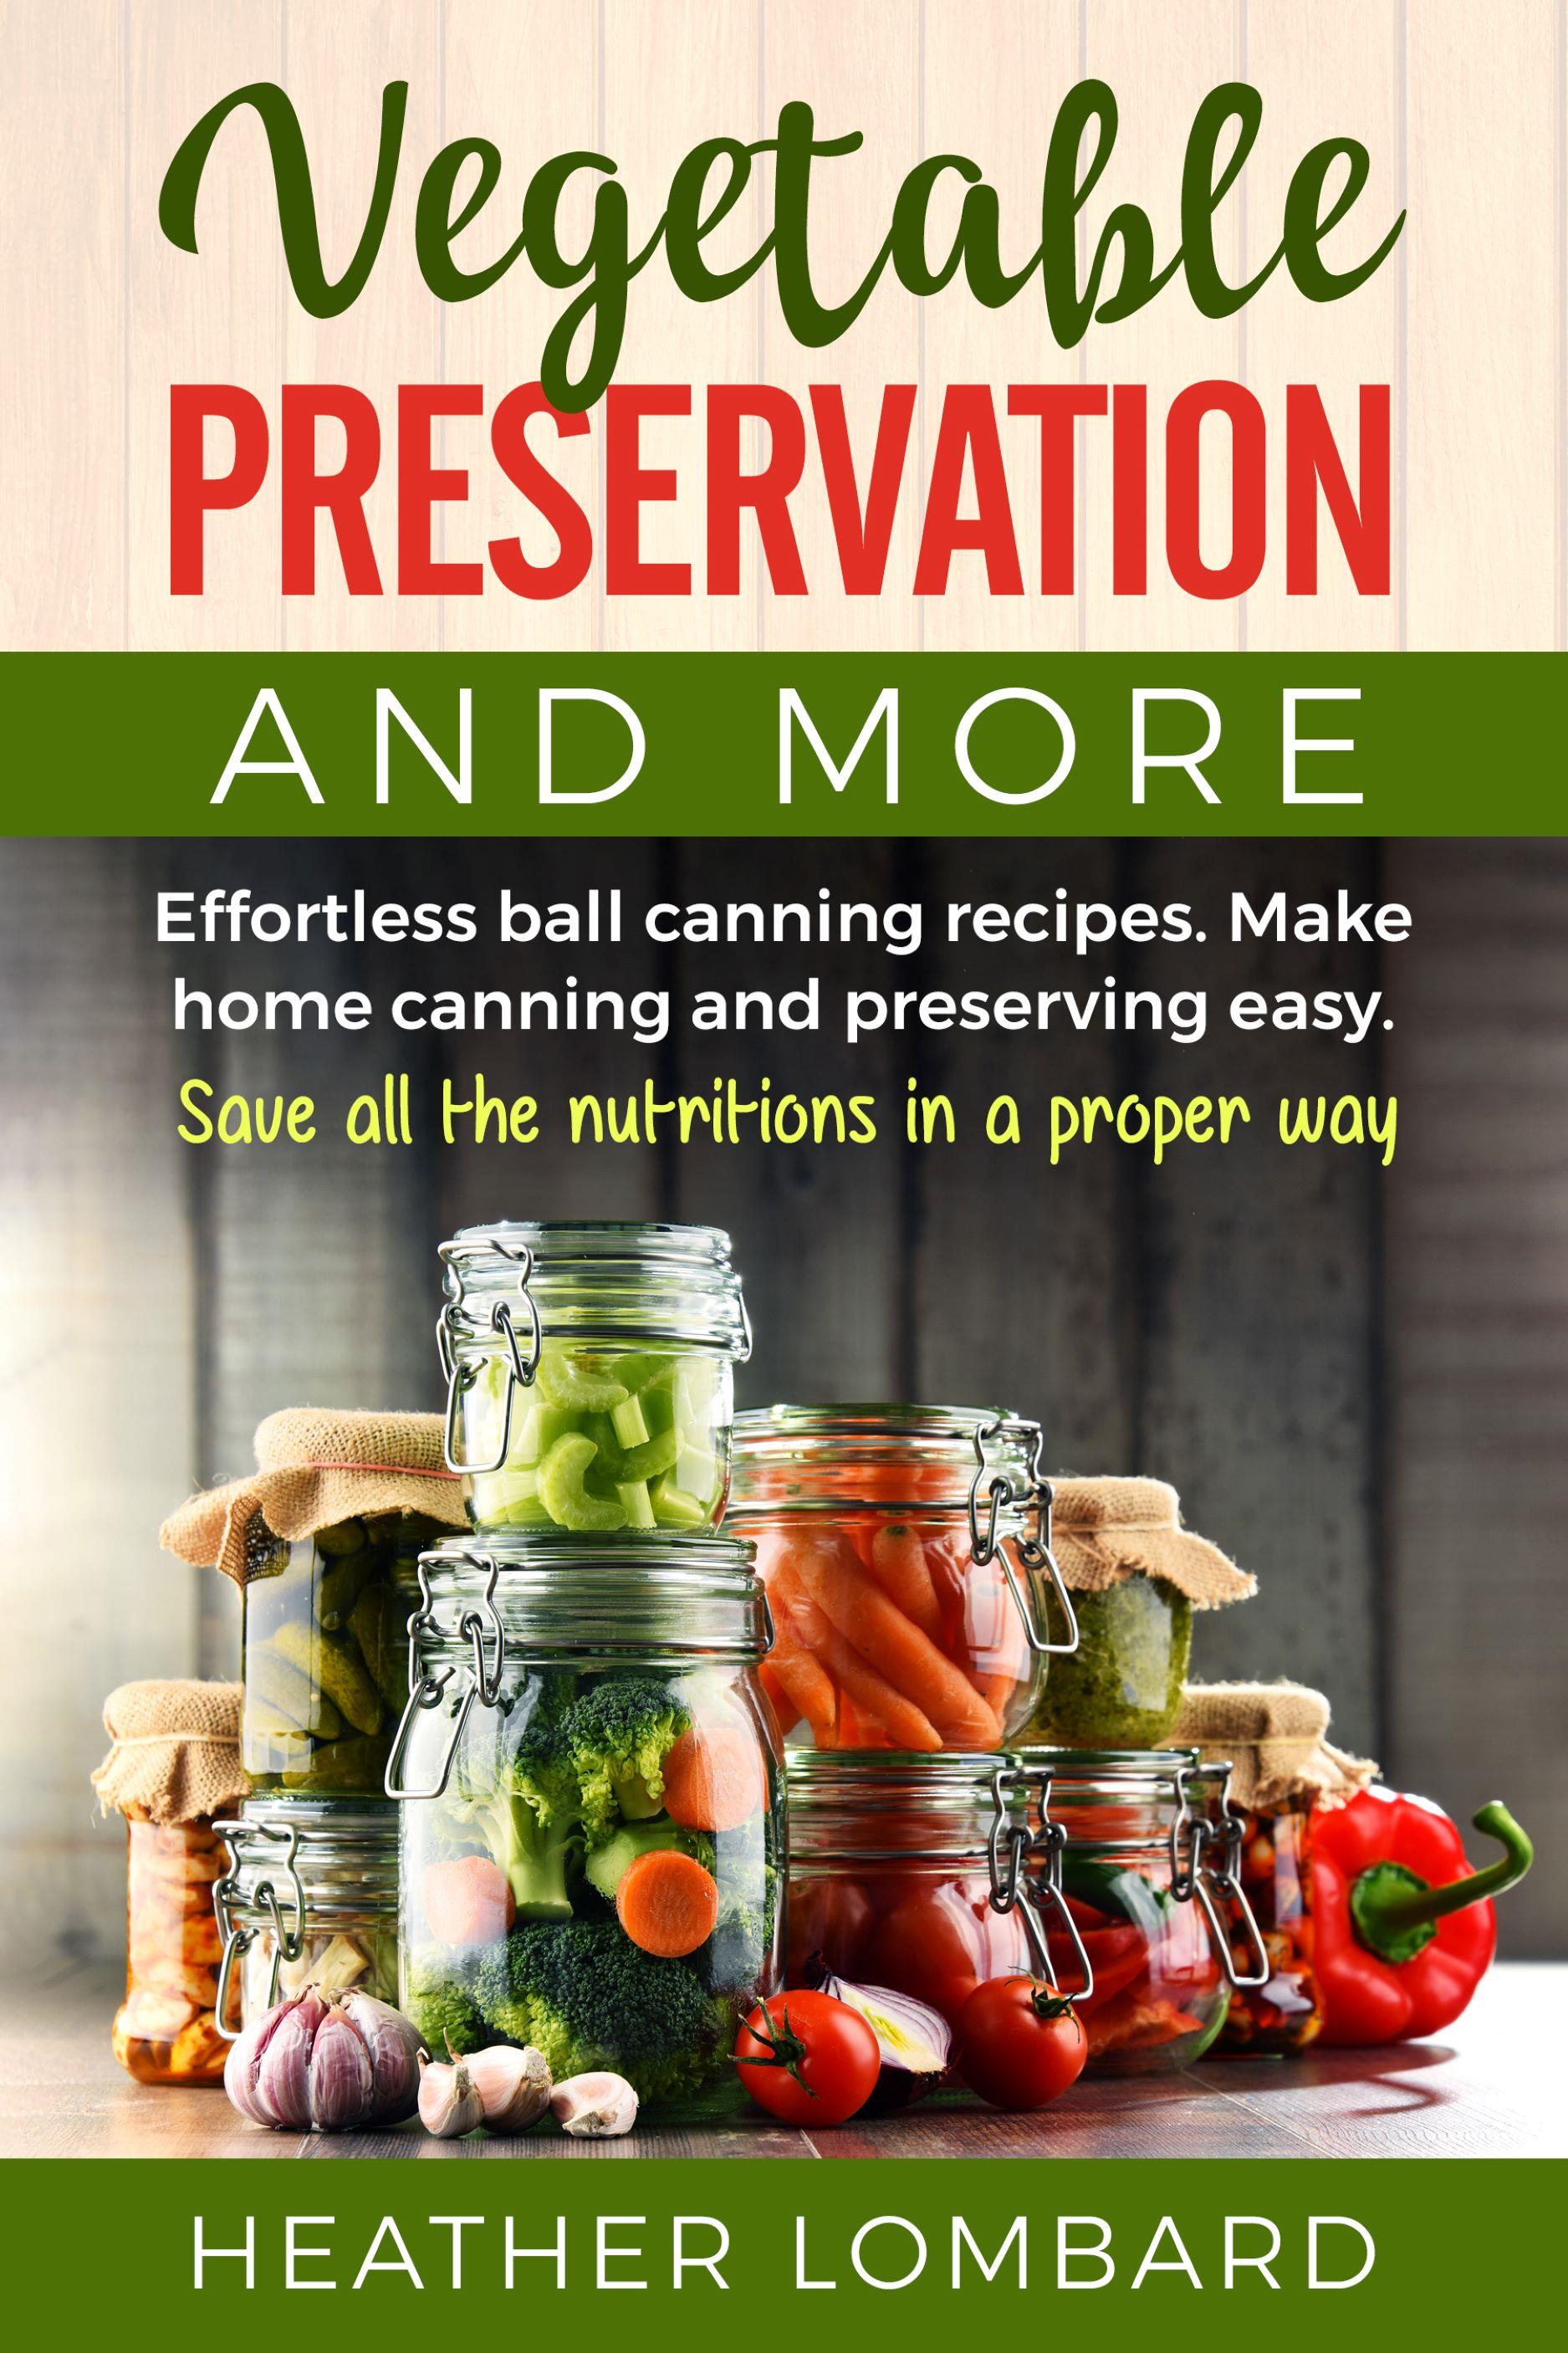 Vegetable preservation and more